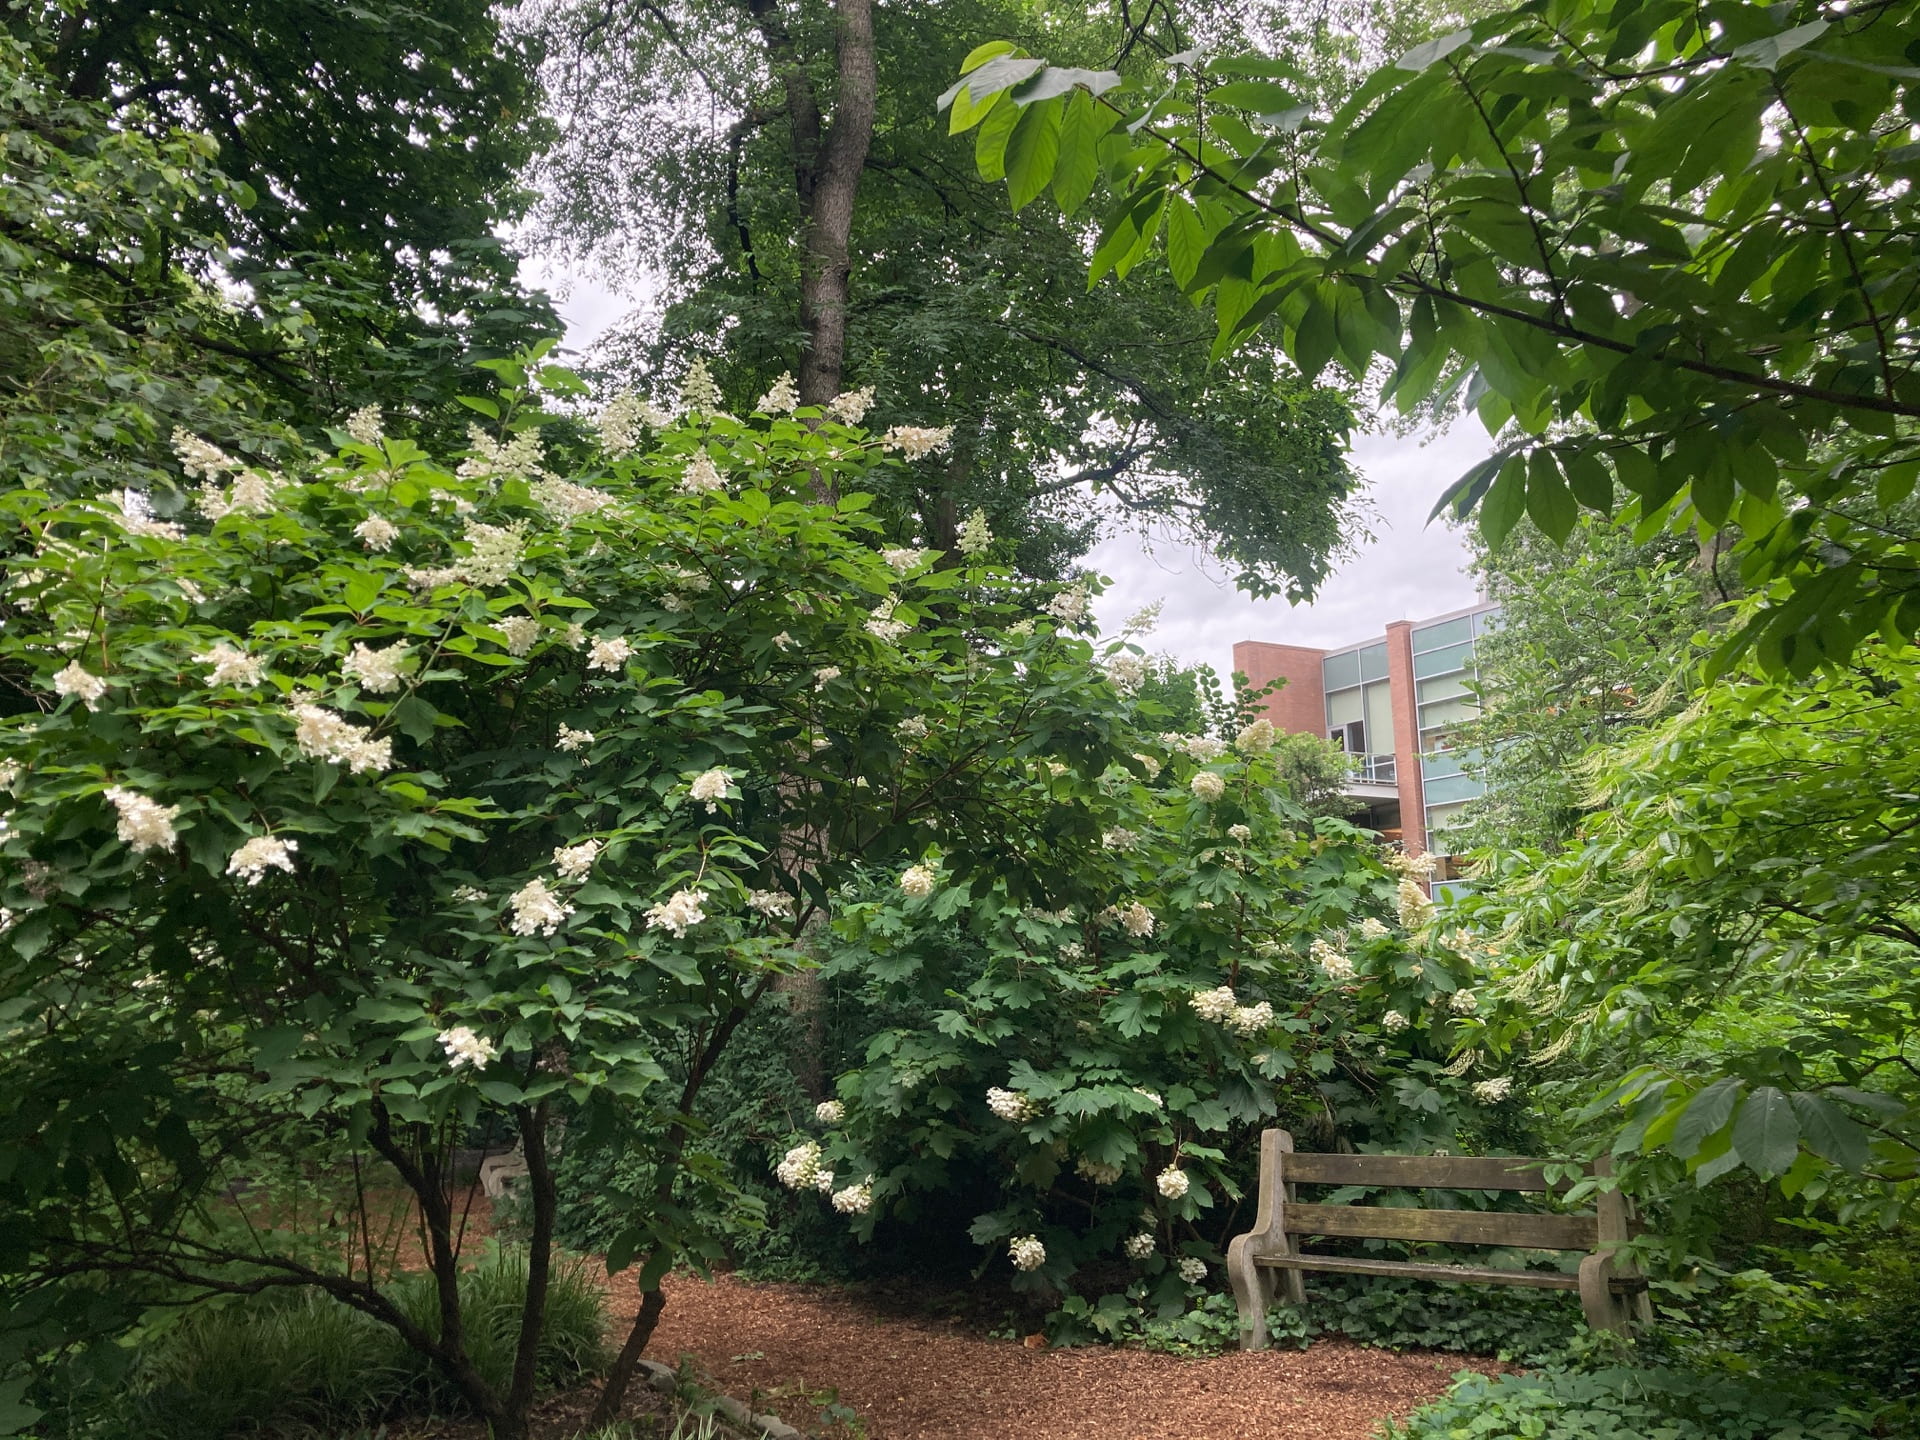 Hydrangea season arrives at the park. Here H. paniculata and H. quercifola border the pathway.